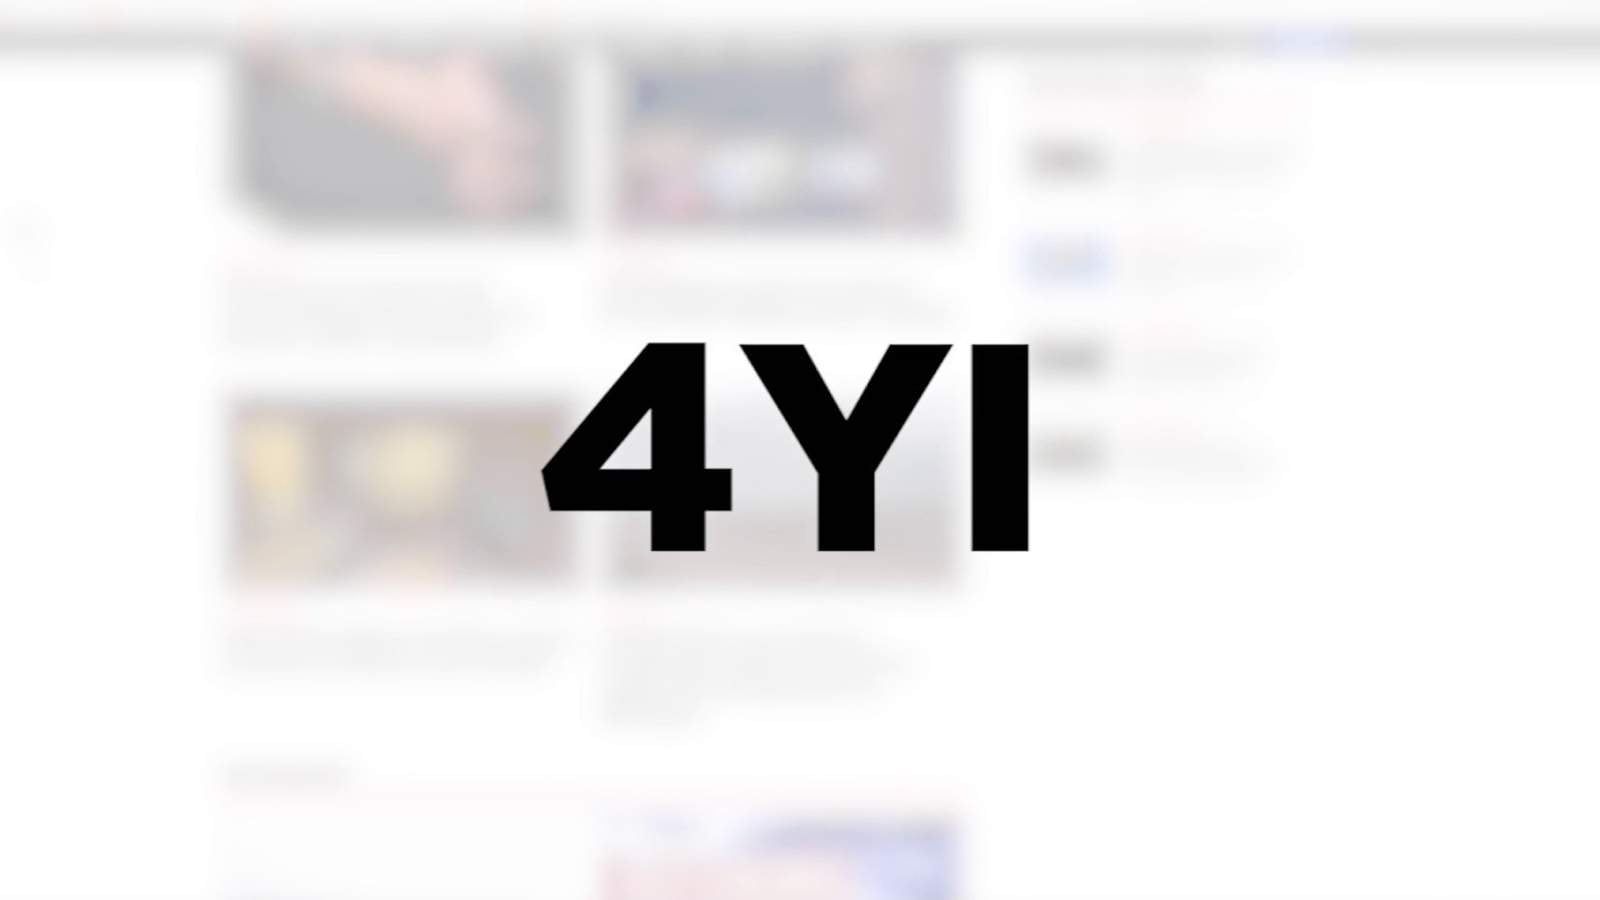 Introducing 4YI -- your questions about Michigan, Metro Detroit answered